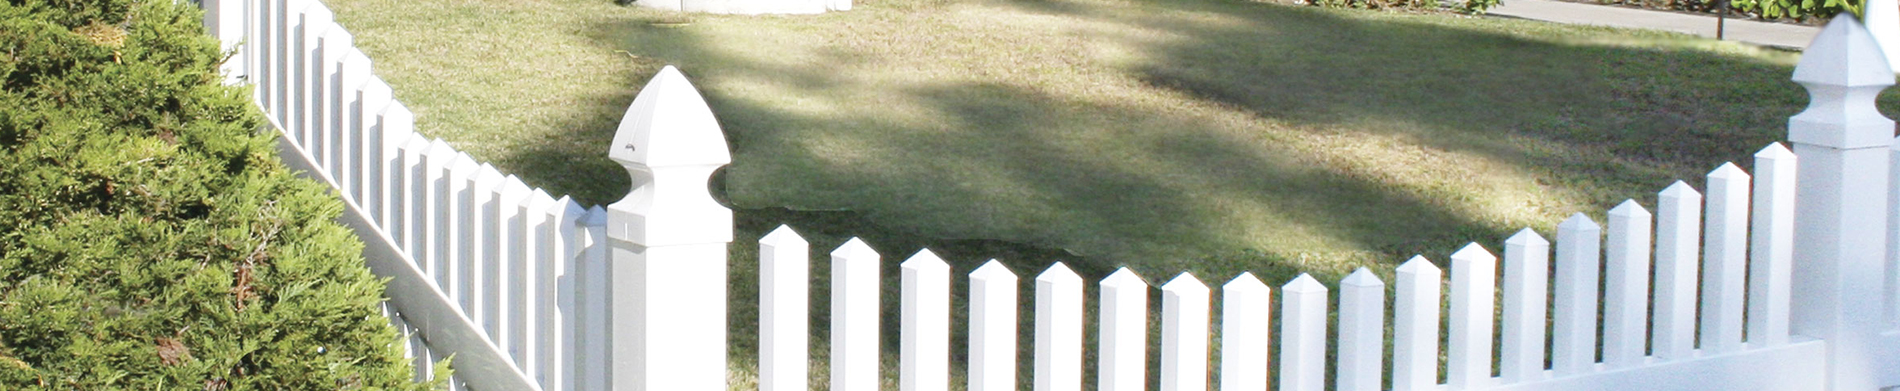 Installing a vinyl picket fence for beautification – Explore the benefits of Duramax Fences